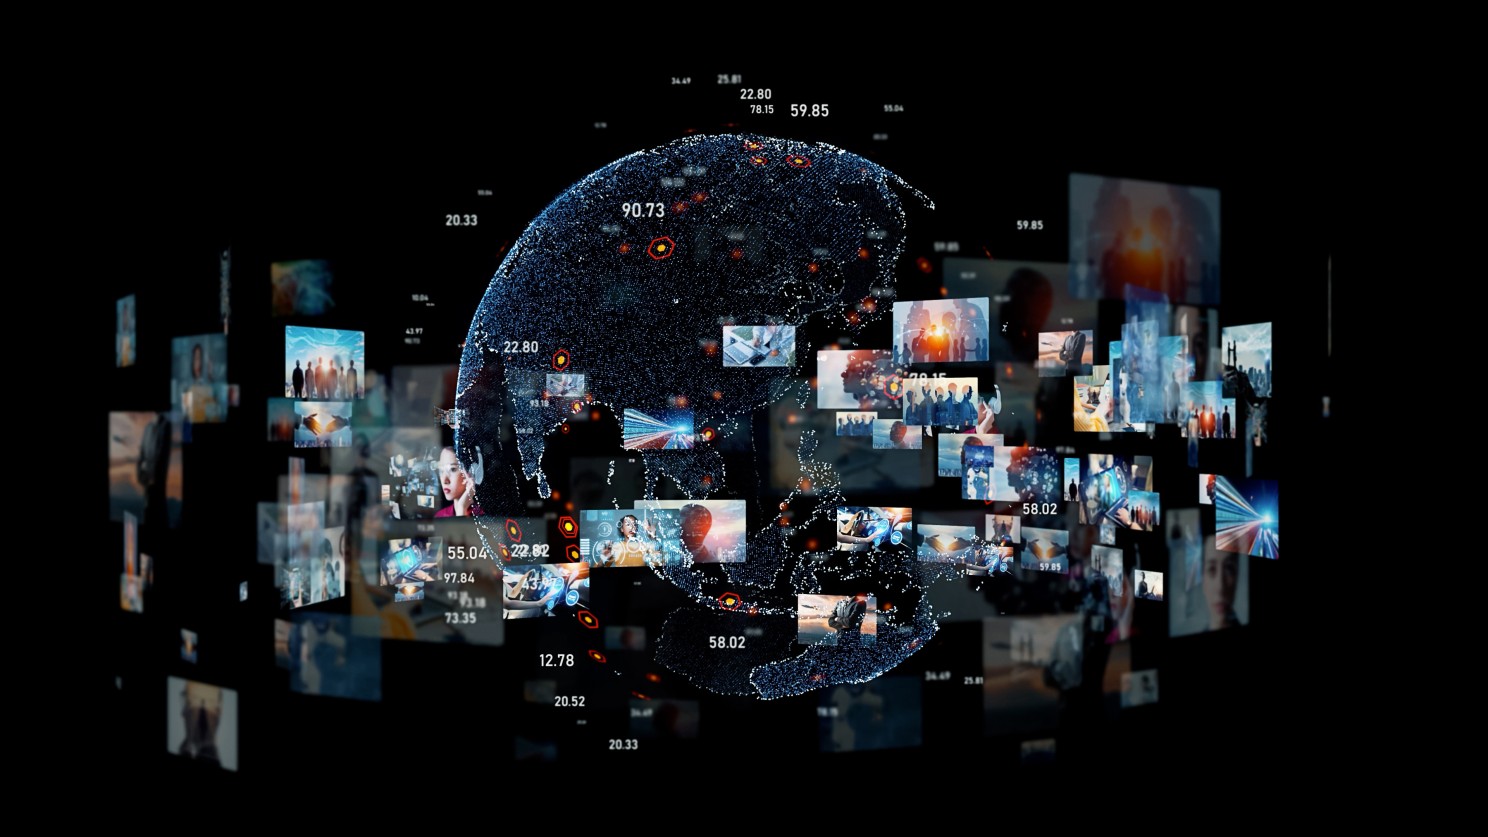 Digital globe surrounded by images and data, representing NFTs.